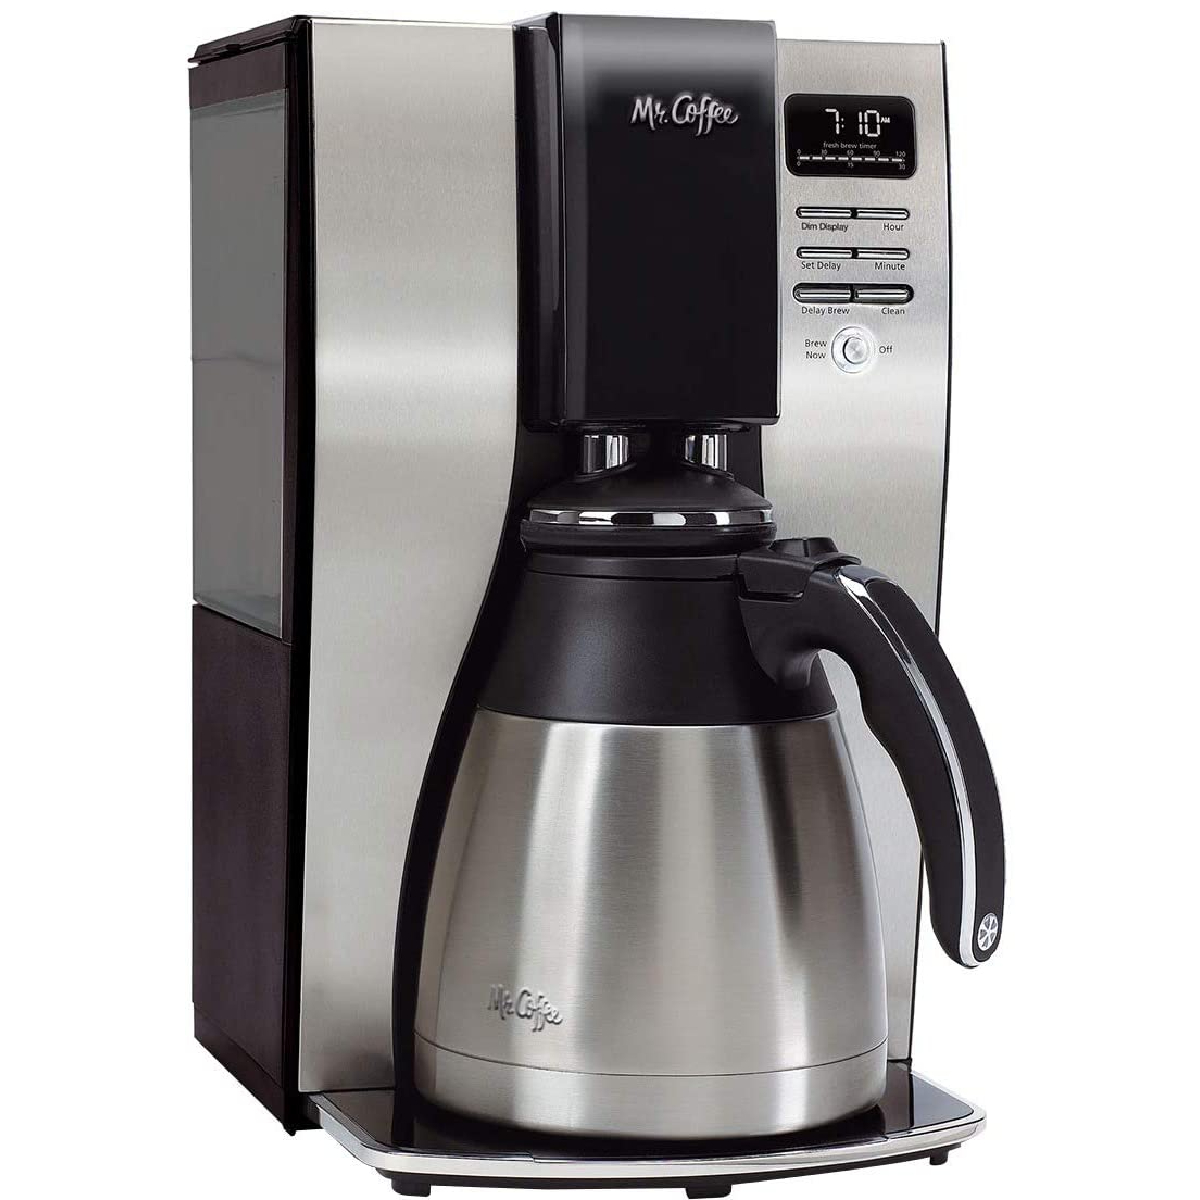 The Best Black Friday Coffee Maker Deals in 2021 Morning Call Coffee